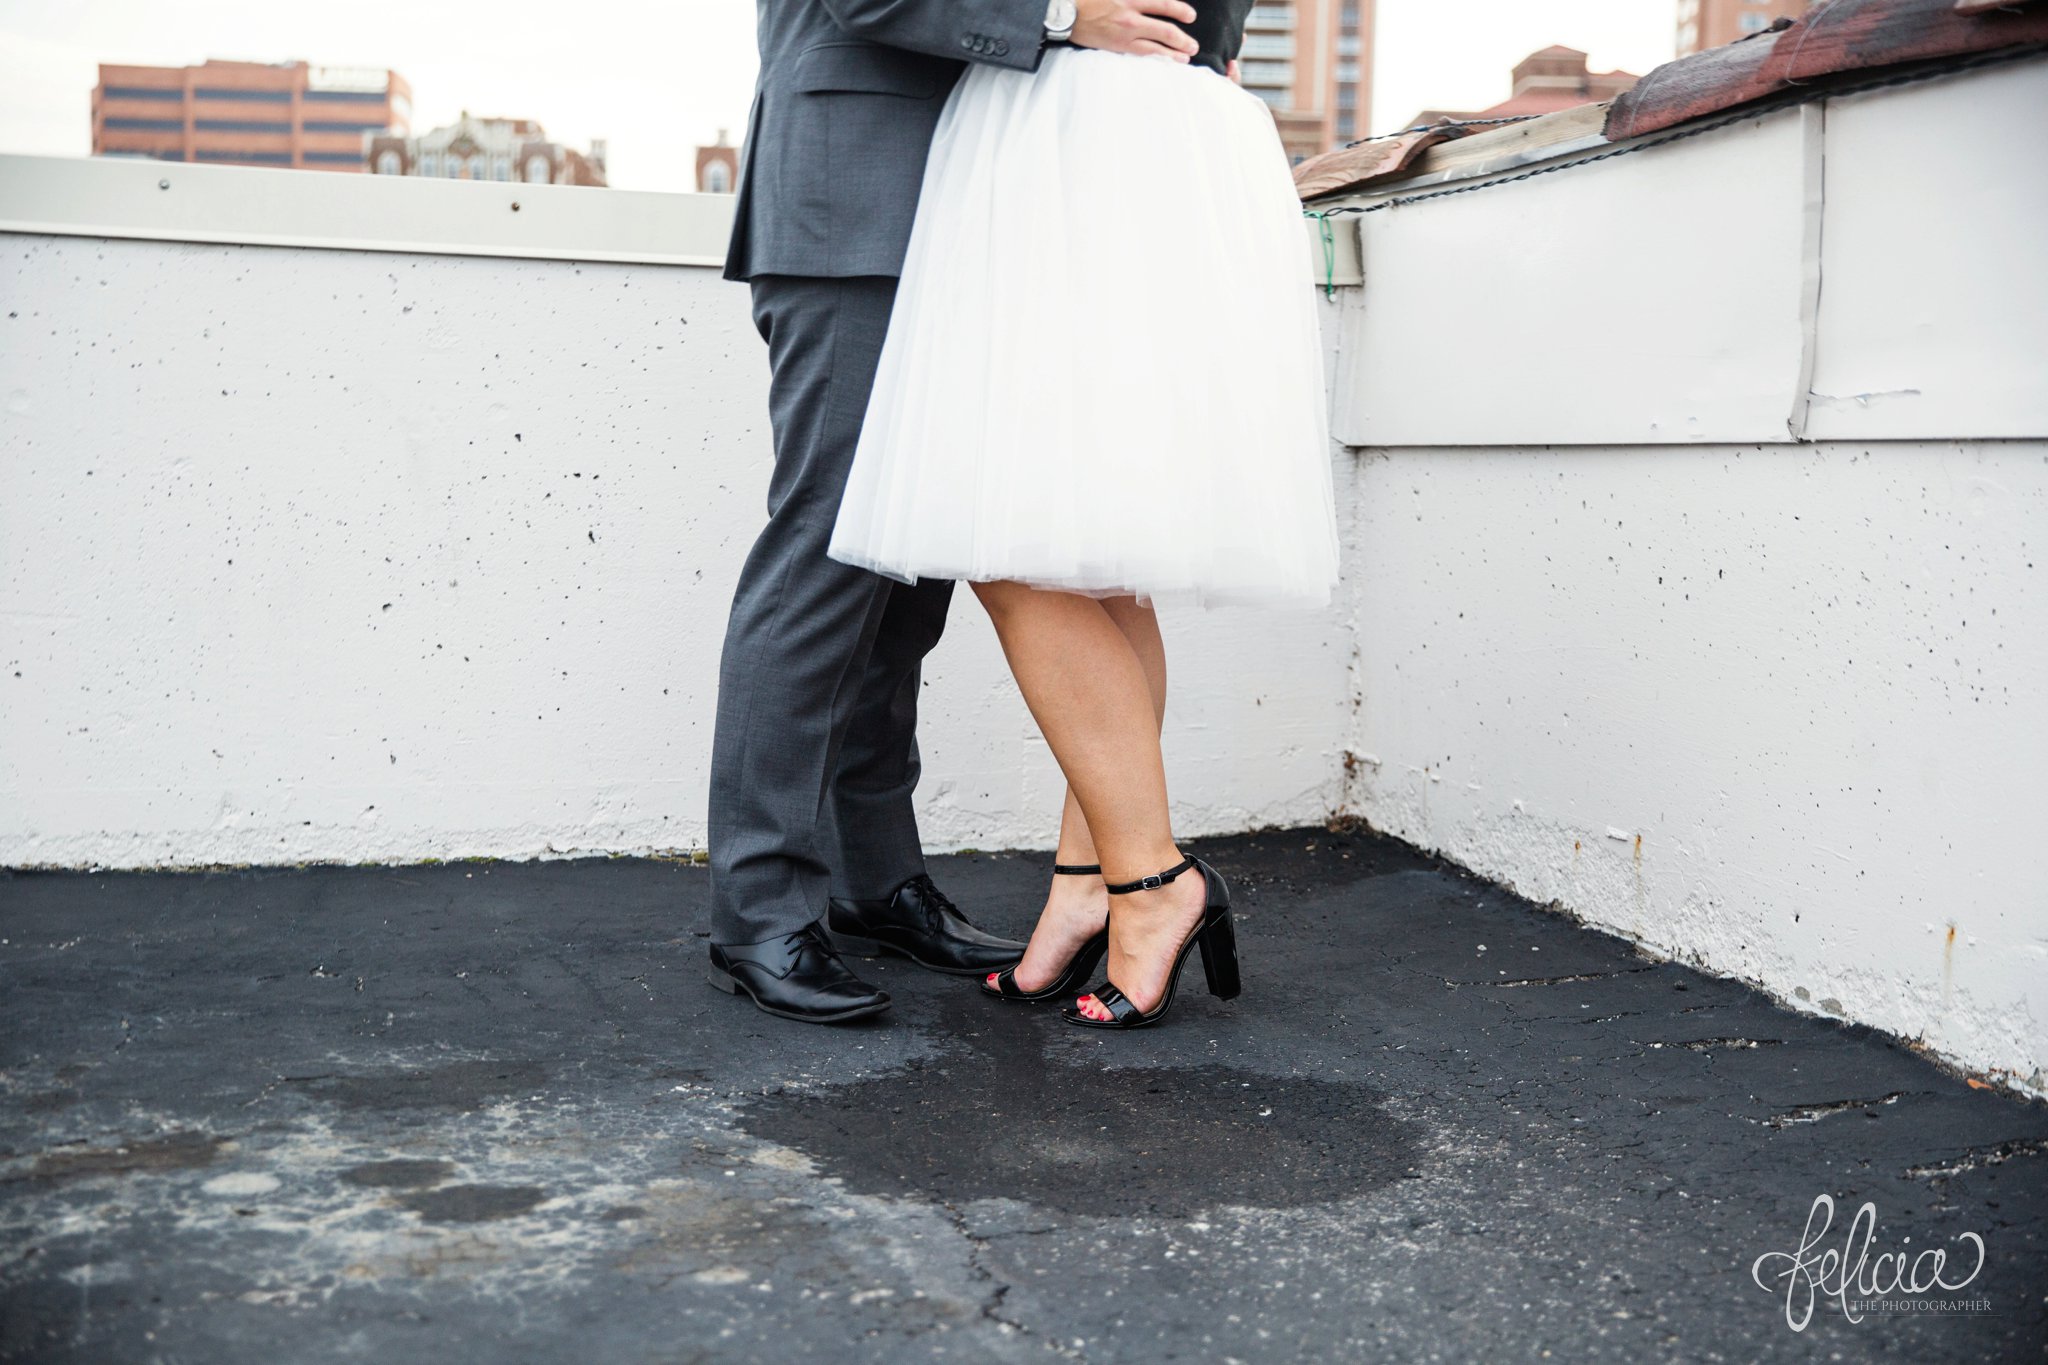 engagement photos | engagement photography | Kansas City | images by feliciathephotographer.com | architectural backgrounds | downtown | downtown Kansas City | fountain | Plaza Country Club | rooftop | terracotta | waist down | white tulle | black tie event 